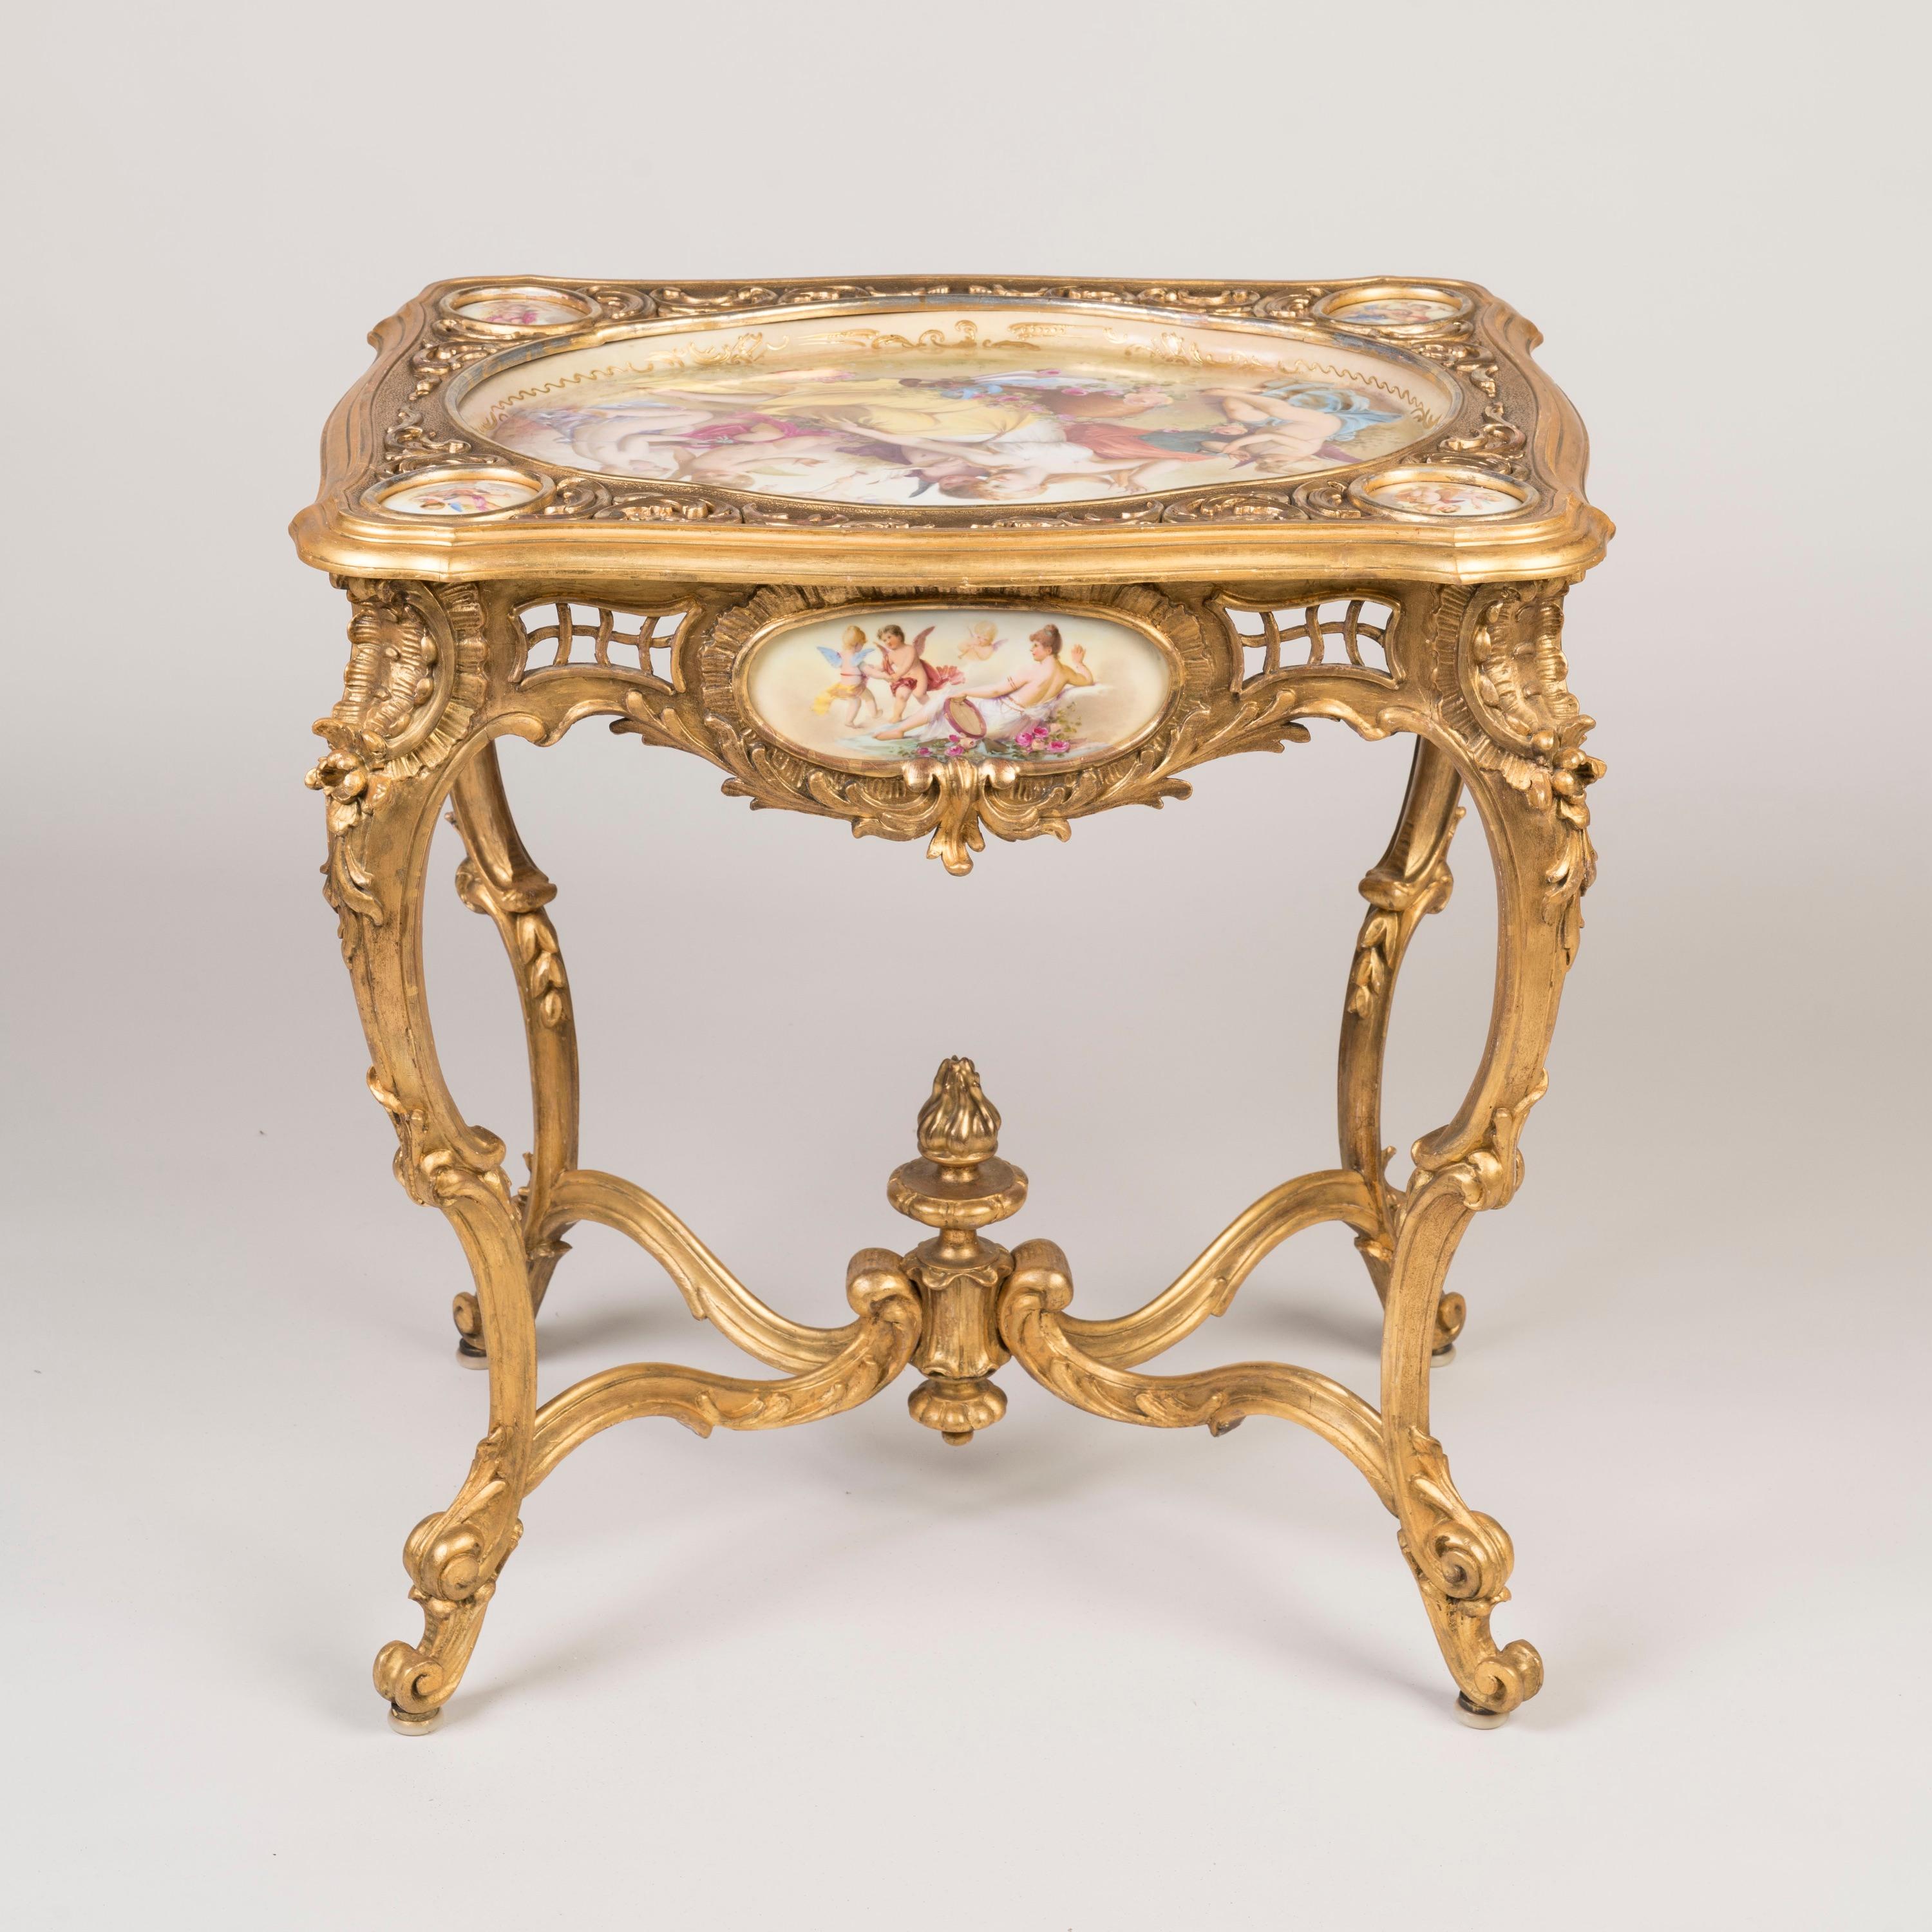 19th Century Carved Table in the Louis XV Style with Porcelain Panels In Good Condition For Sale In London, GB